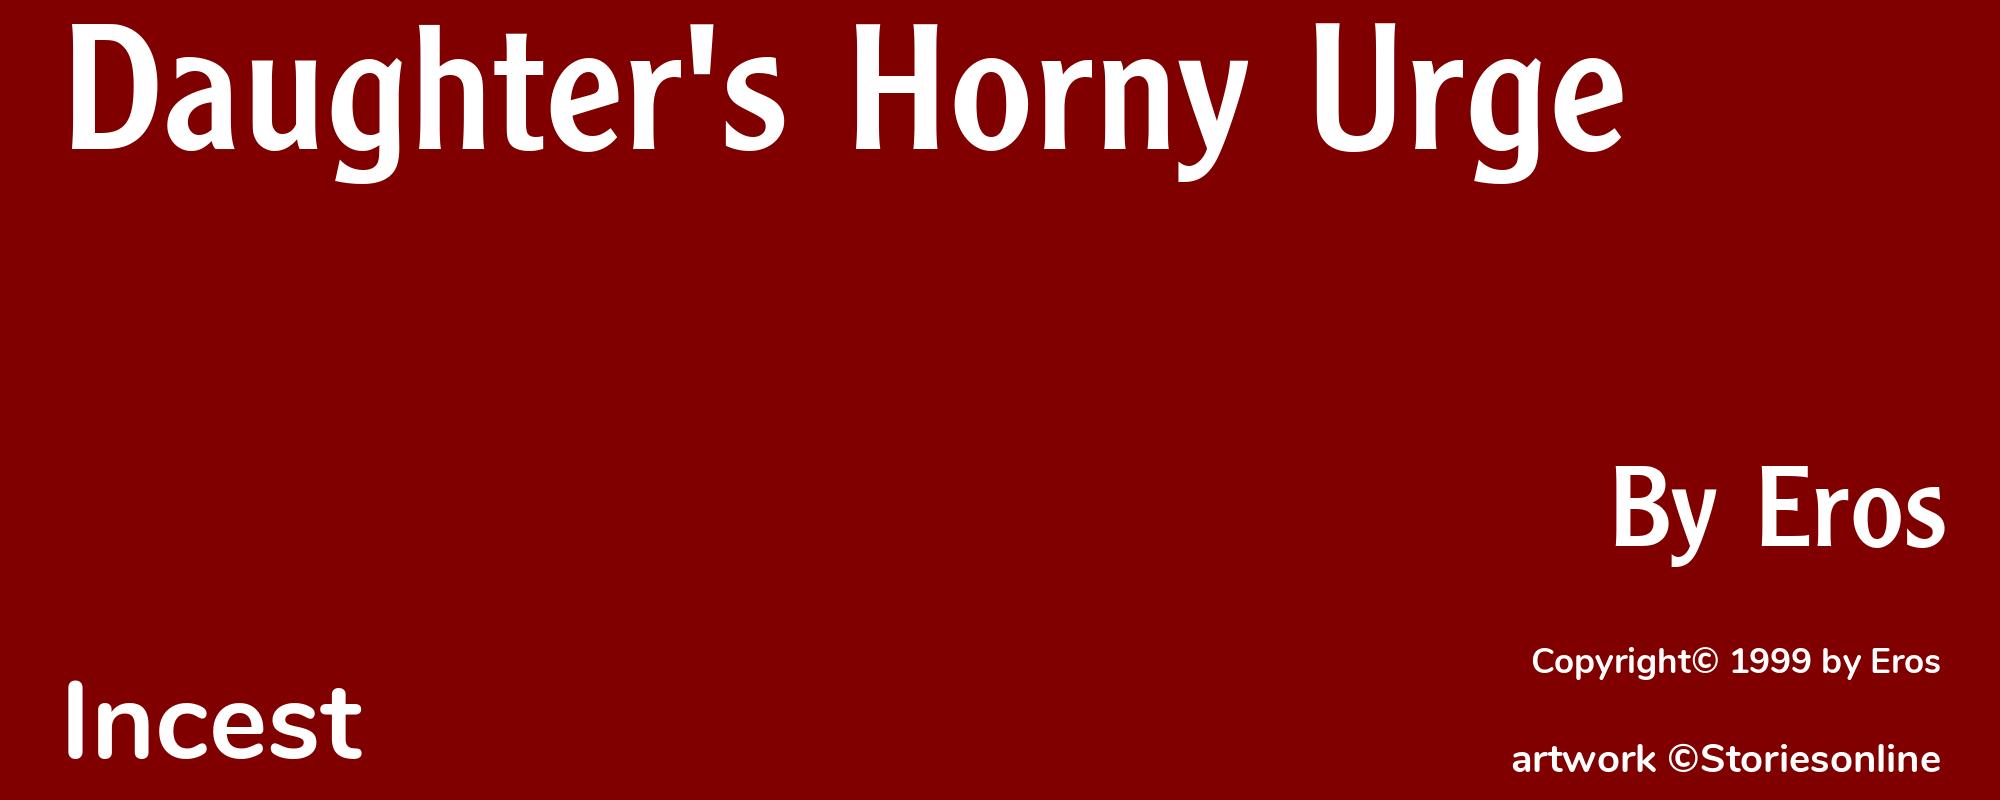 Daughter's Horny Urge - Cover